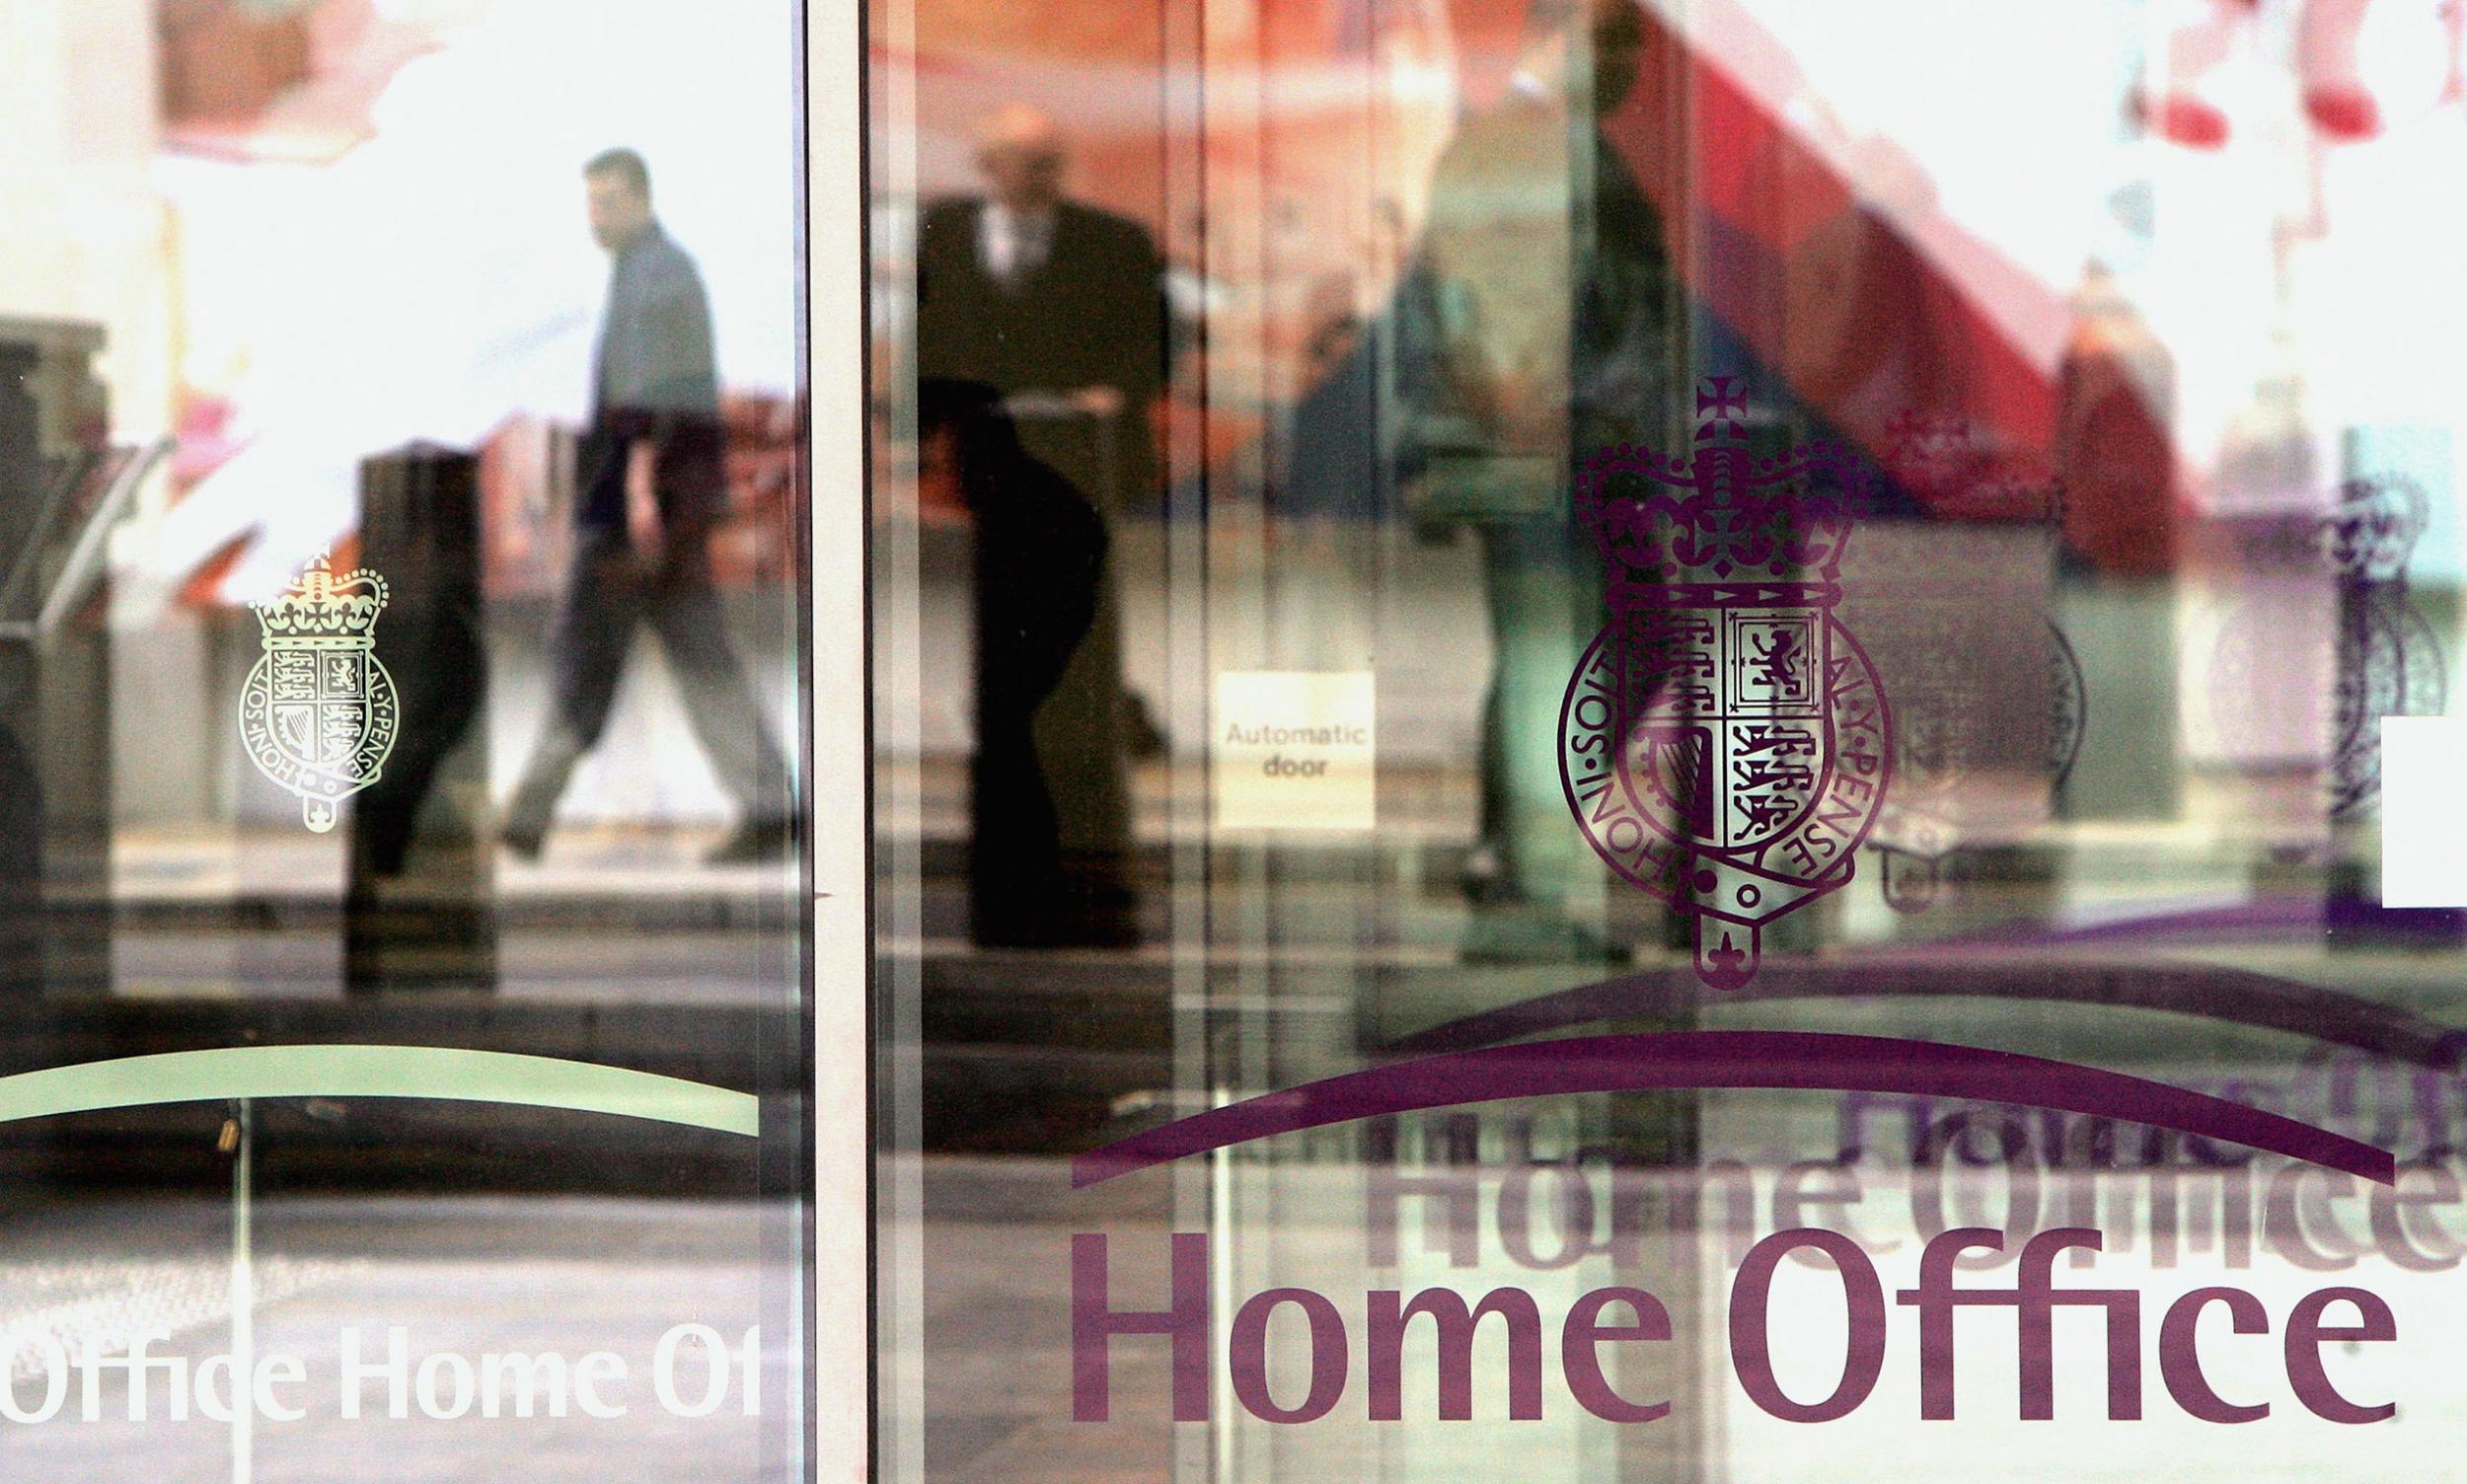 The Home Office has reported an attrition rate of 46% for asylum caseworkers